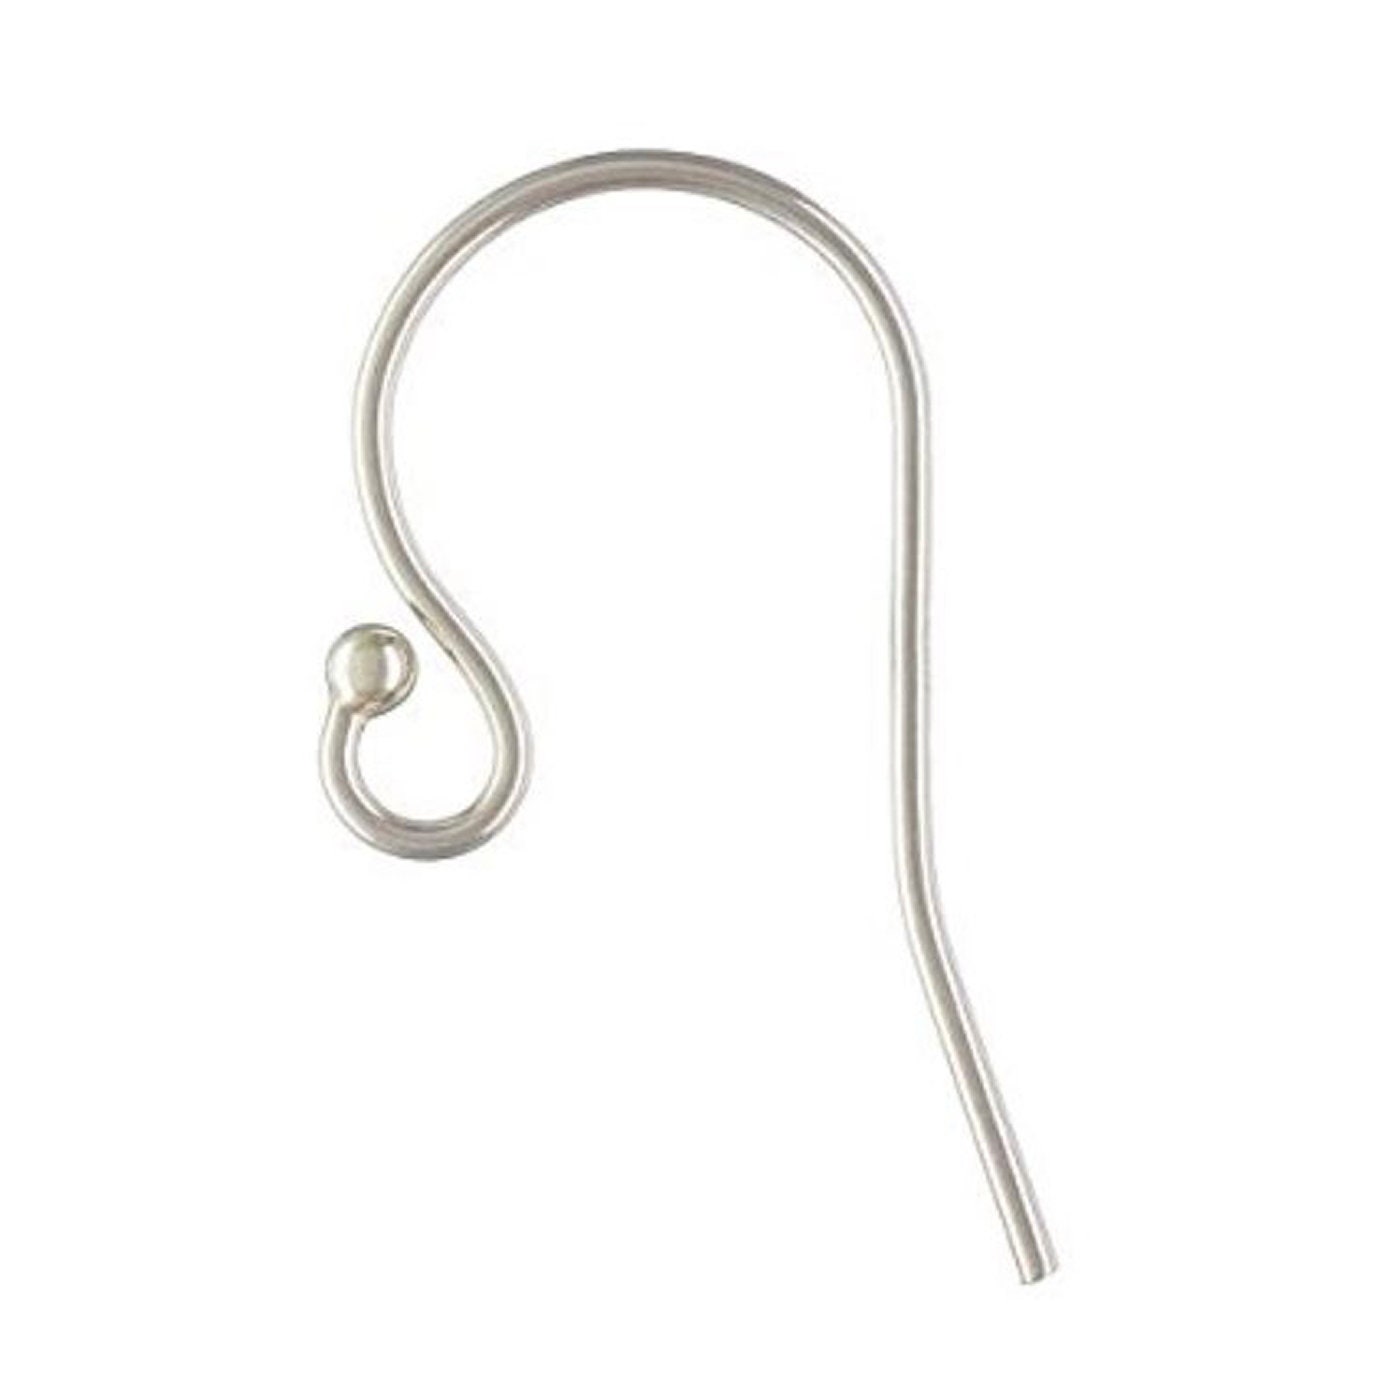 Celectigo 925 Sterling Silver Earring Hooks, 1000-pcs Ear Wire Fish Hooks Hypoallergenic Earring Making Kit with Clear Silicone Earring Backs Stoppers